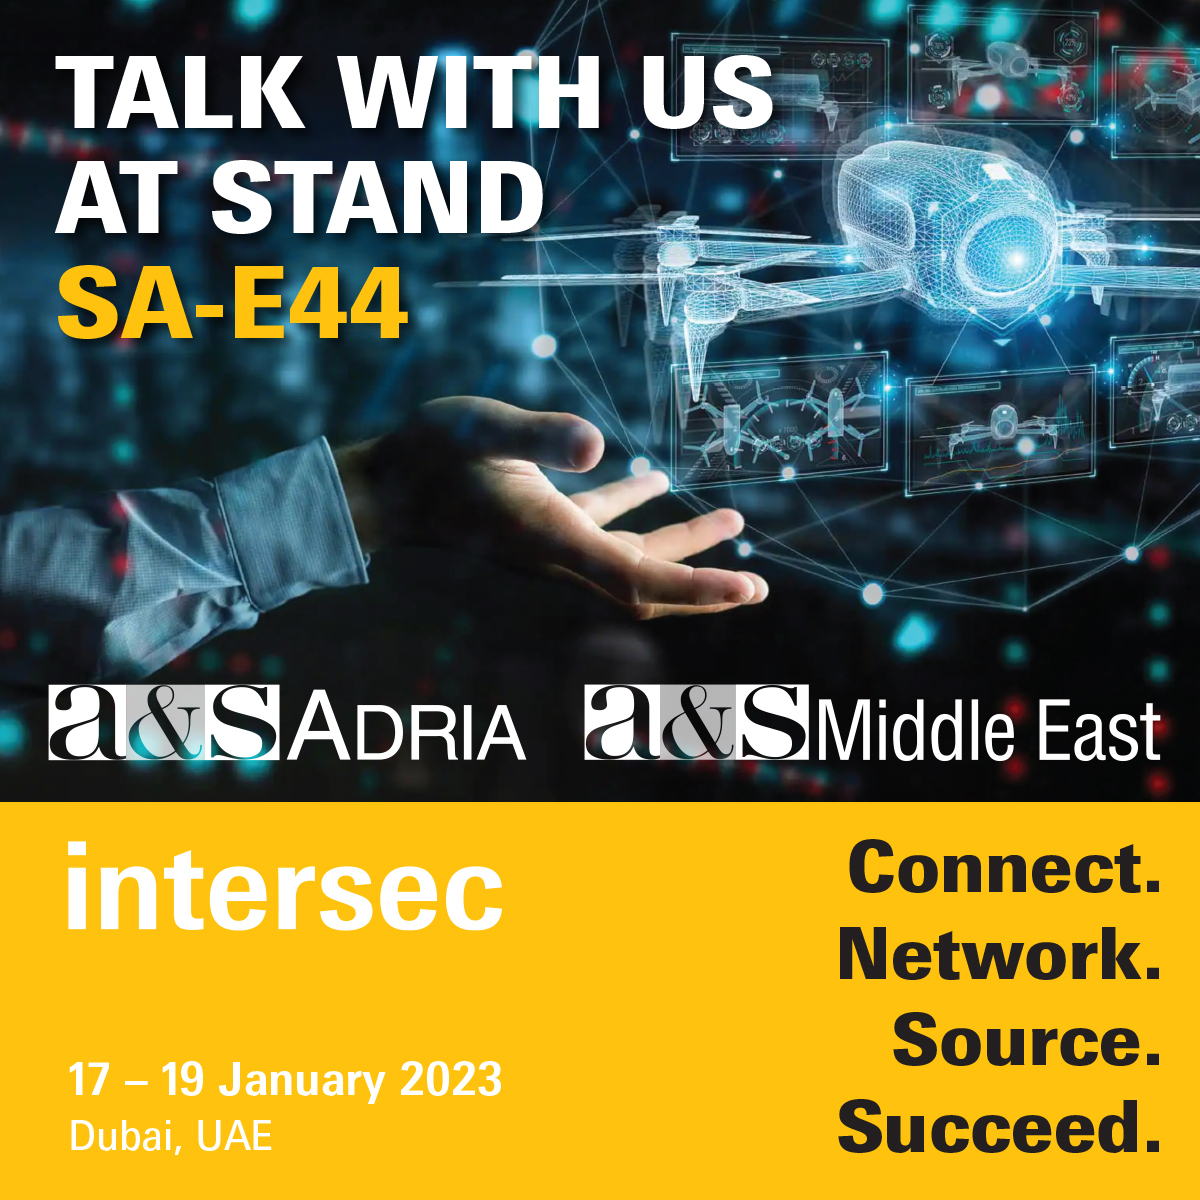 With the help of partners from asmag.com , as Adria Magazine is 🚀 launching @asMiddleEast1, magazine focused on the needs of tech and entrepreneurial professionals

You are more than welcome to join at the stand SA-E44, and find out the opportunities.